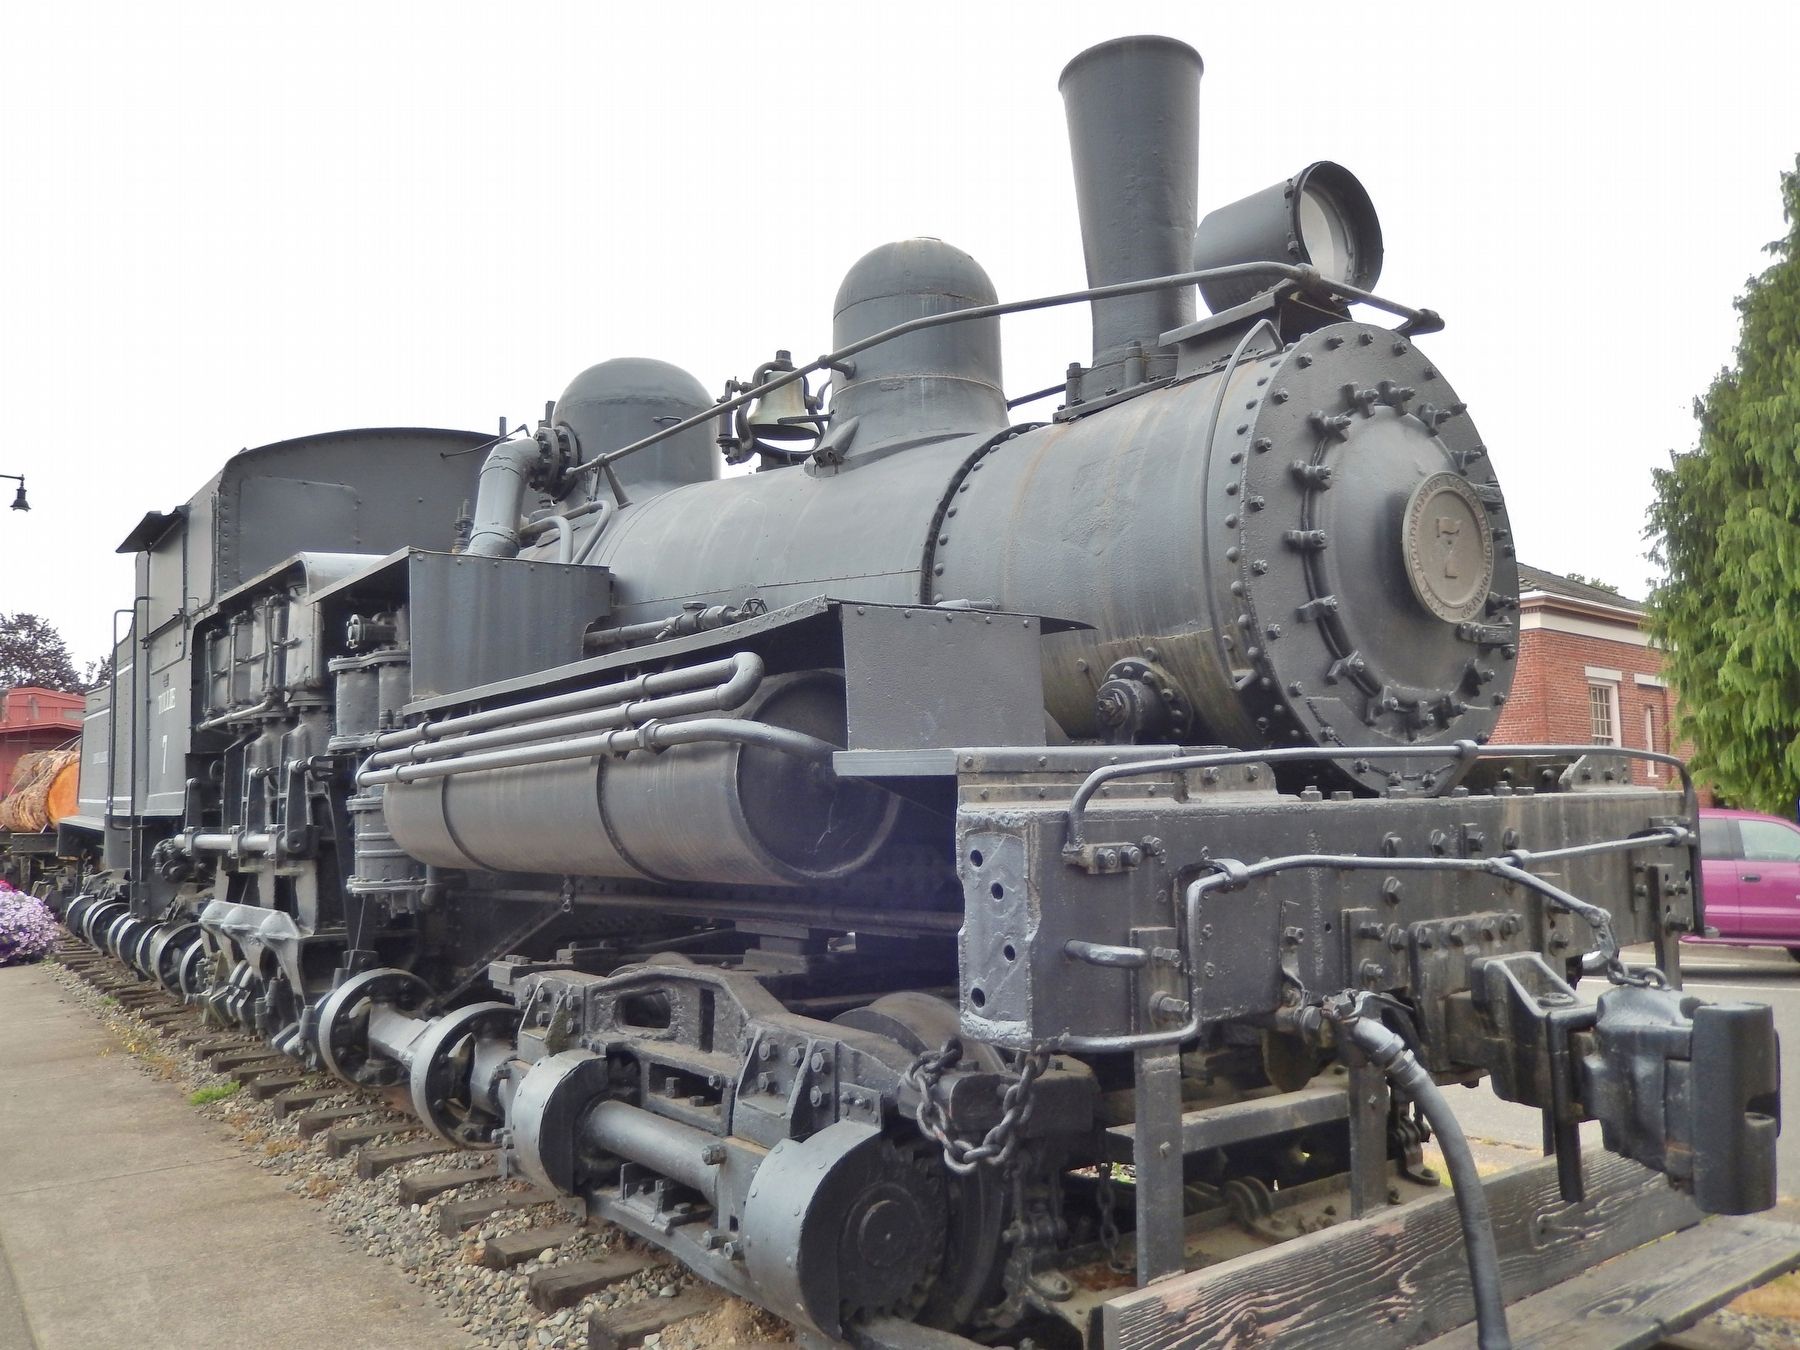 Simpson Logging Company Shay Locomotive #7 (<i>front view</i>) image. Click for full size.